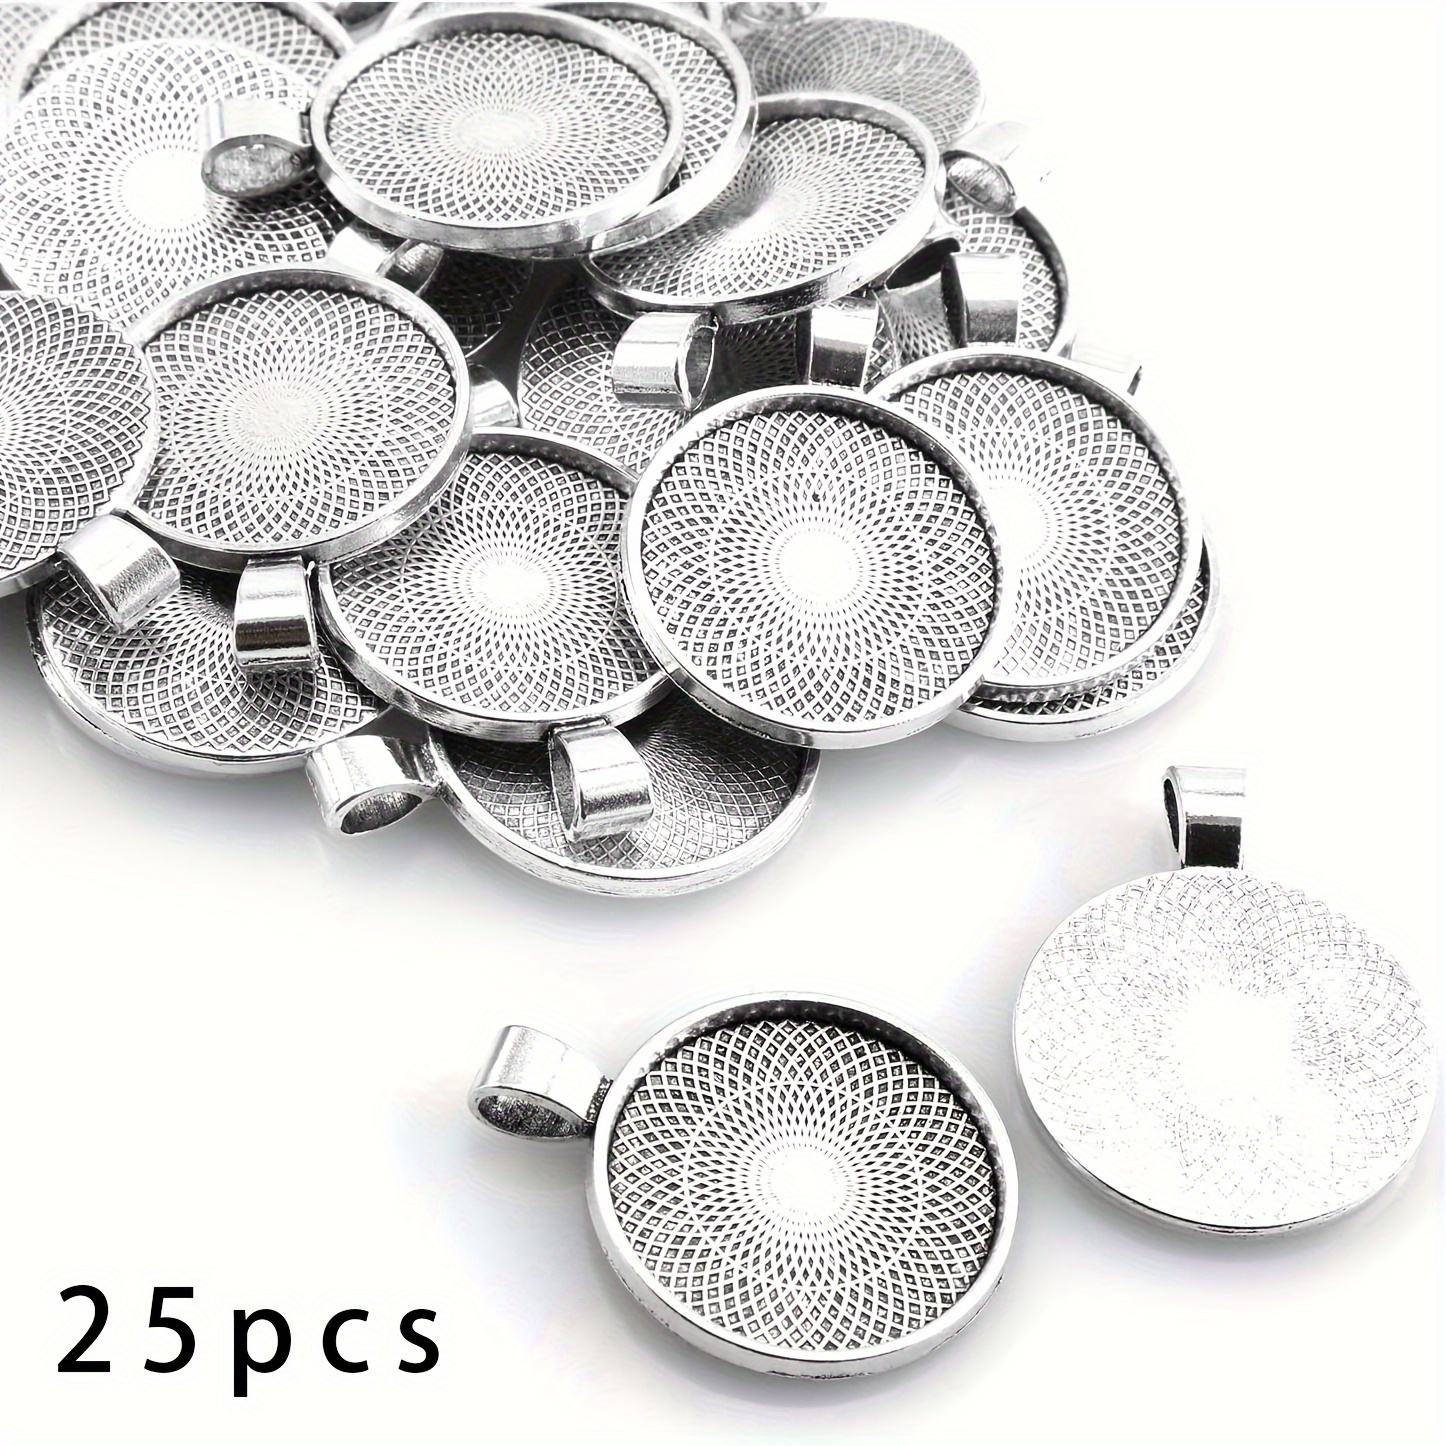 

25pcs Round Open Bezel Pendant Trays Setting Cabochon Blank Base Photo Pendant Base For Diy Crafting Jewelry Findings Making Accessories 25mm